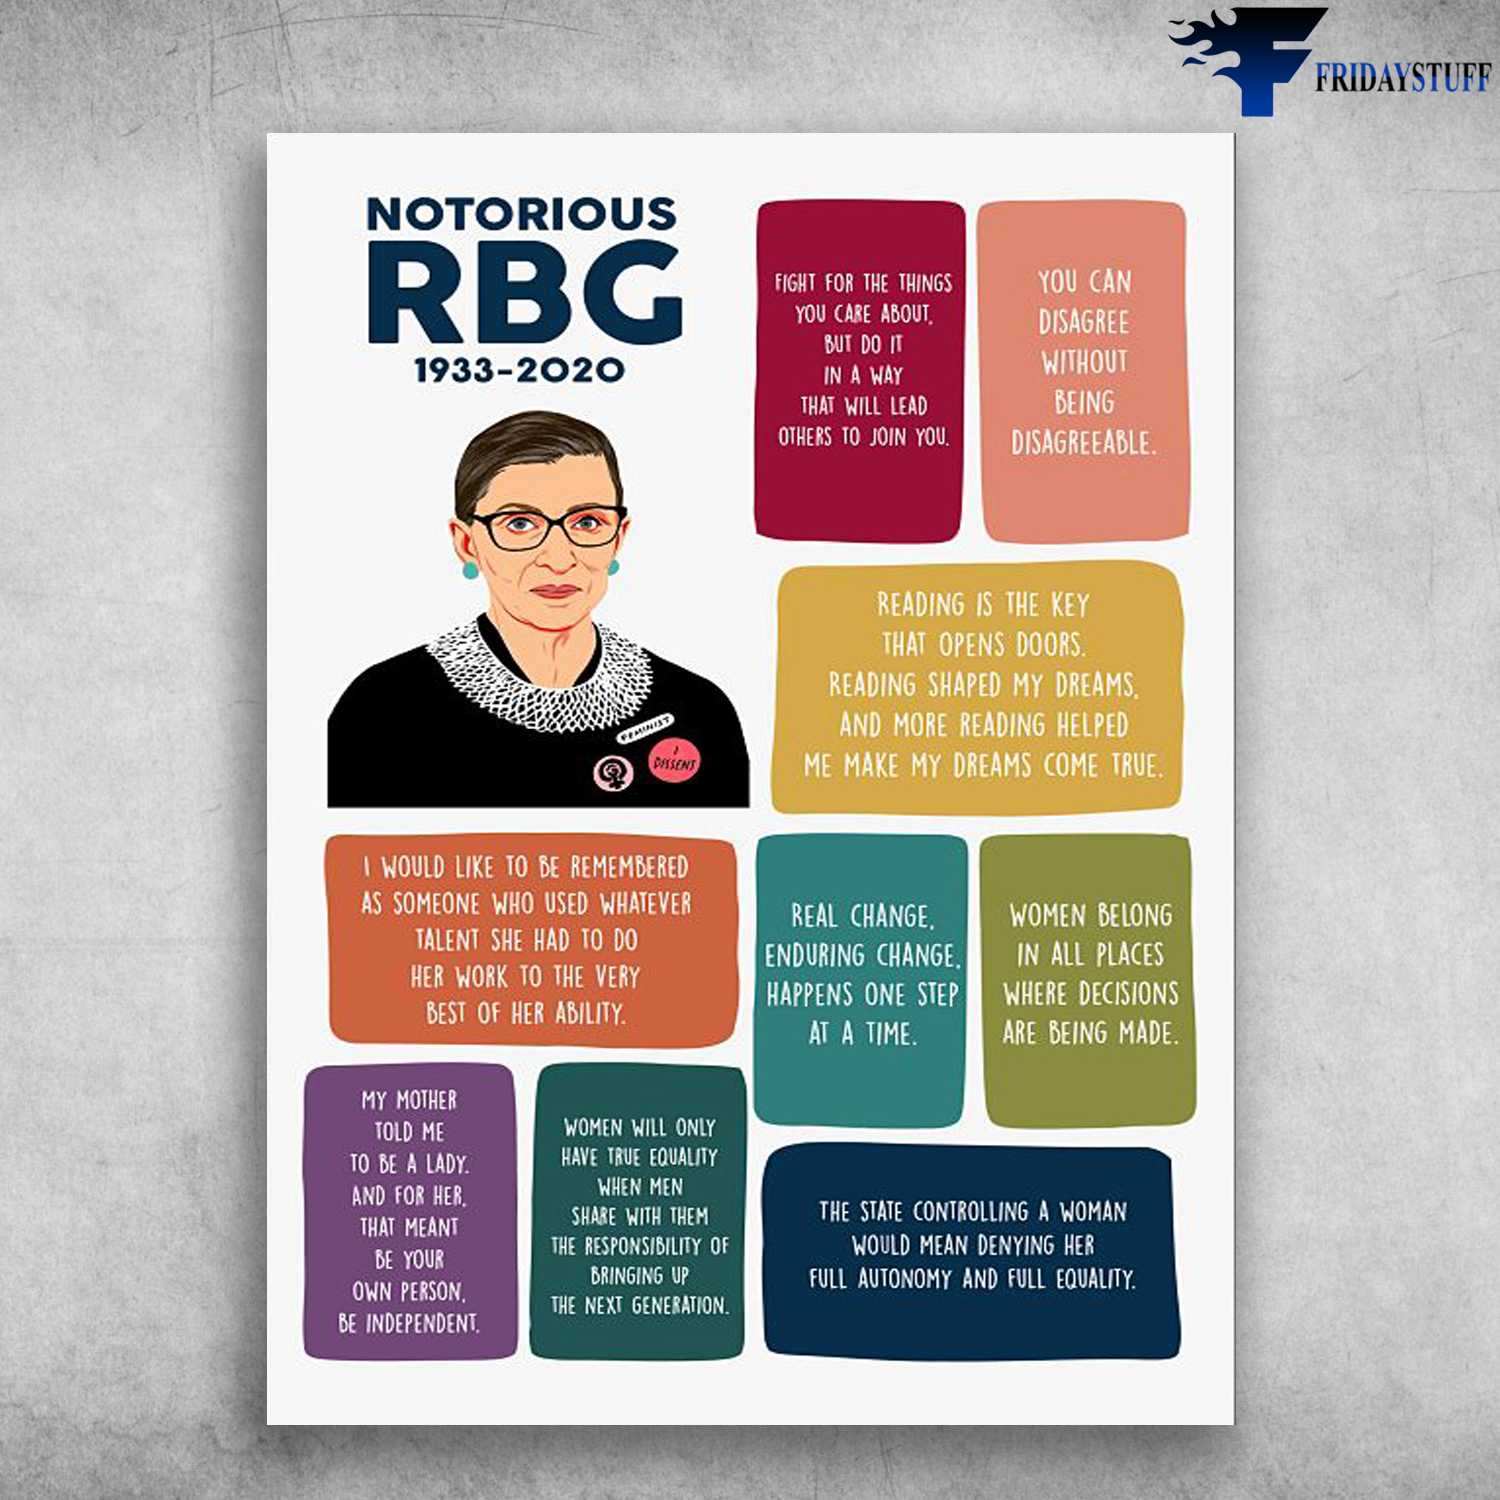 Notoriois RBG, Ruth Bader Ginsburg - I Would Like To Be Remembered, As Someone Wo Used Whatever Talent She Had, To Do Her Work To The Very Best Of Her Ability